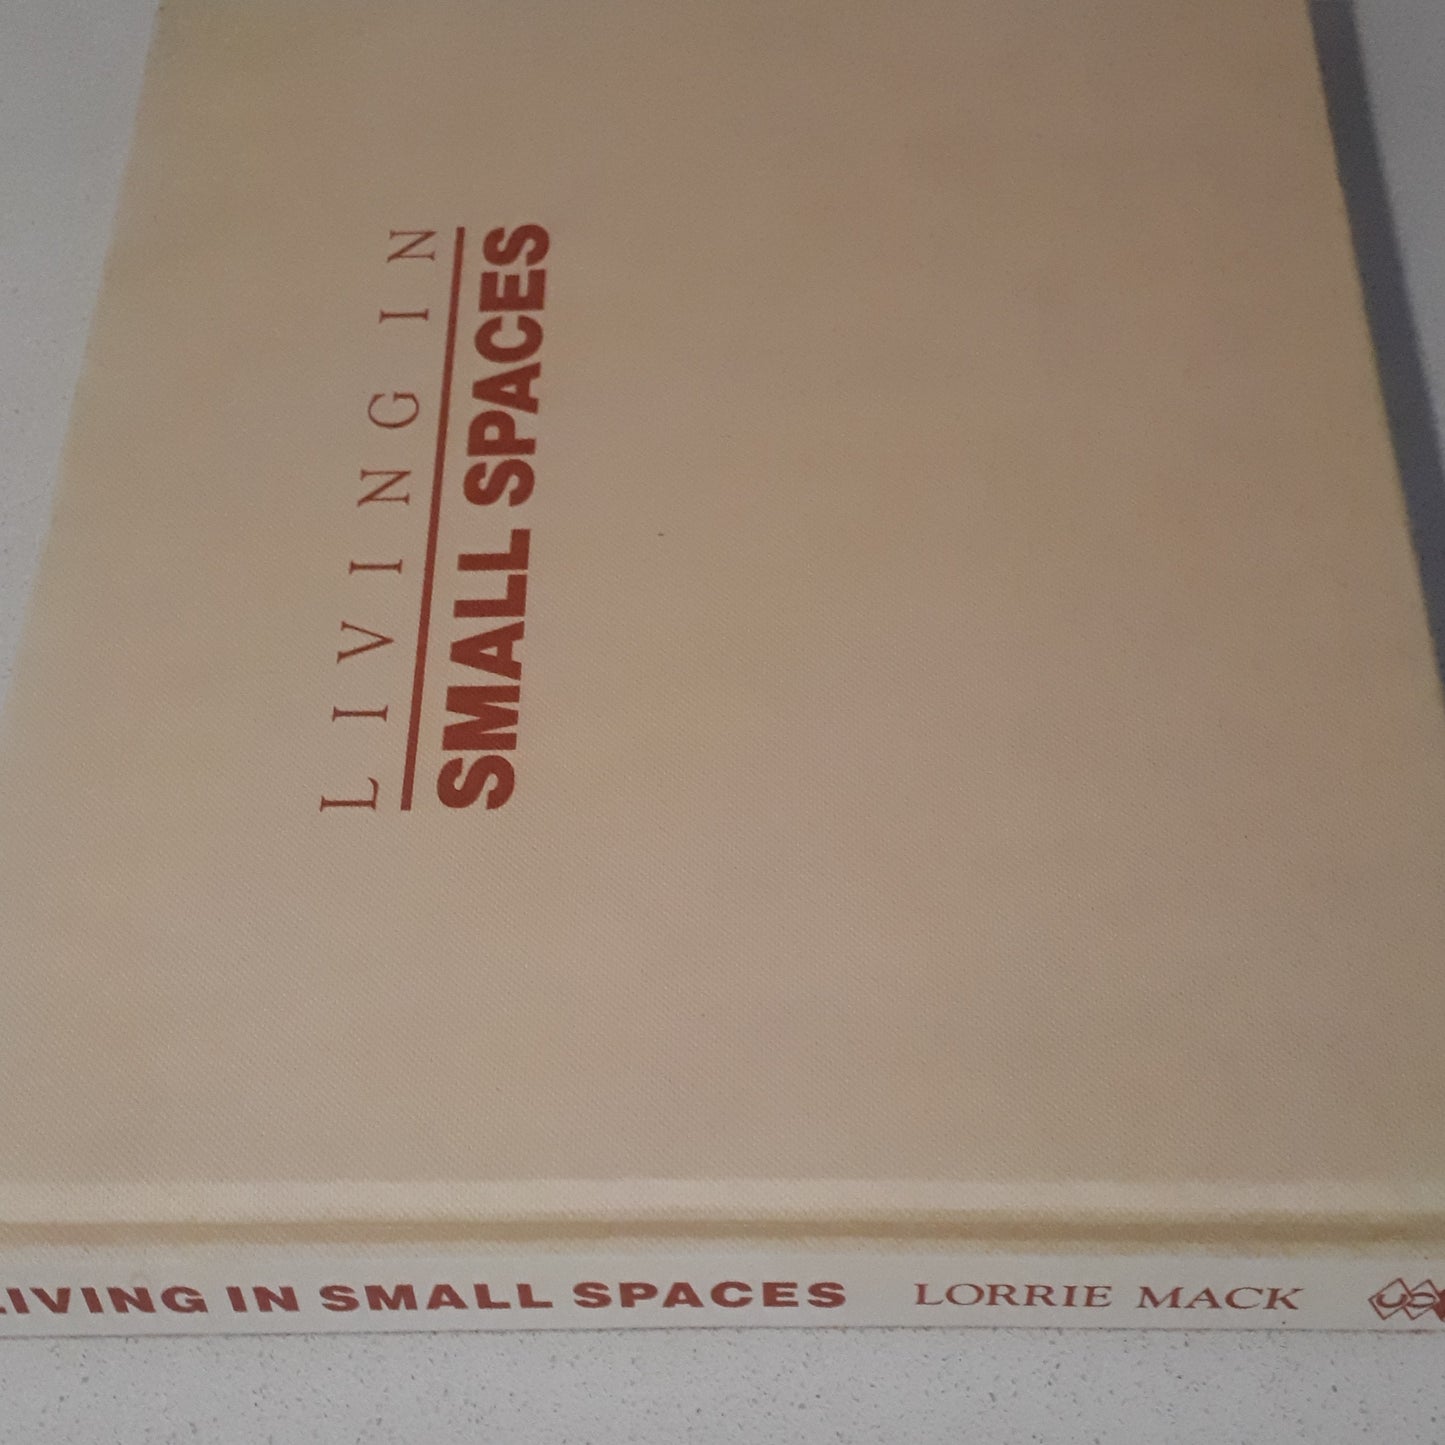 Living in Small Spaces by Lorrie Mack